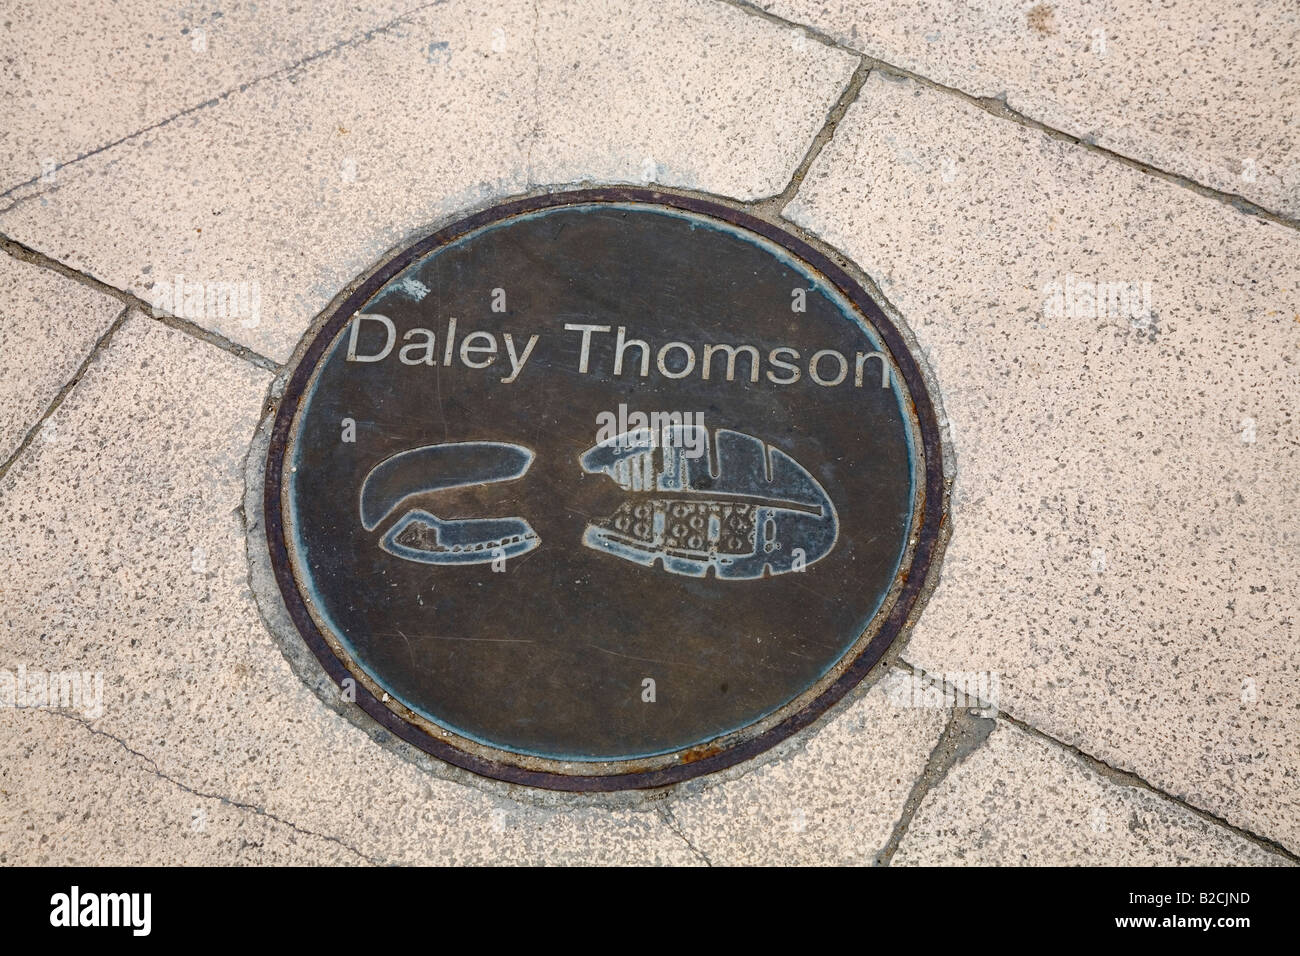 Daley Thomson footprints at the Olympic Stadium Barcelona Spain May 2008 Stock Photo